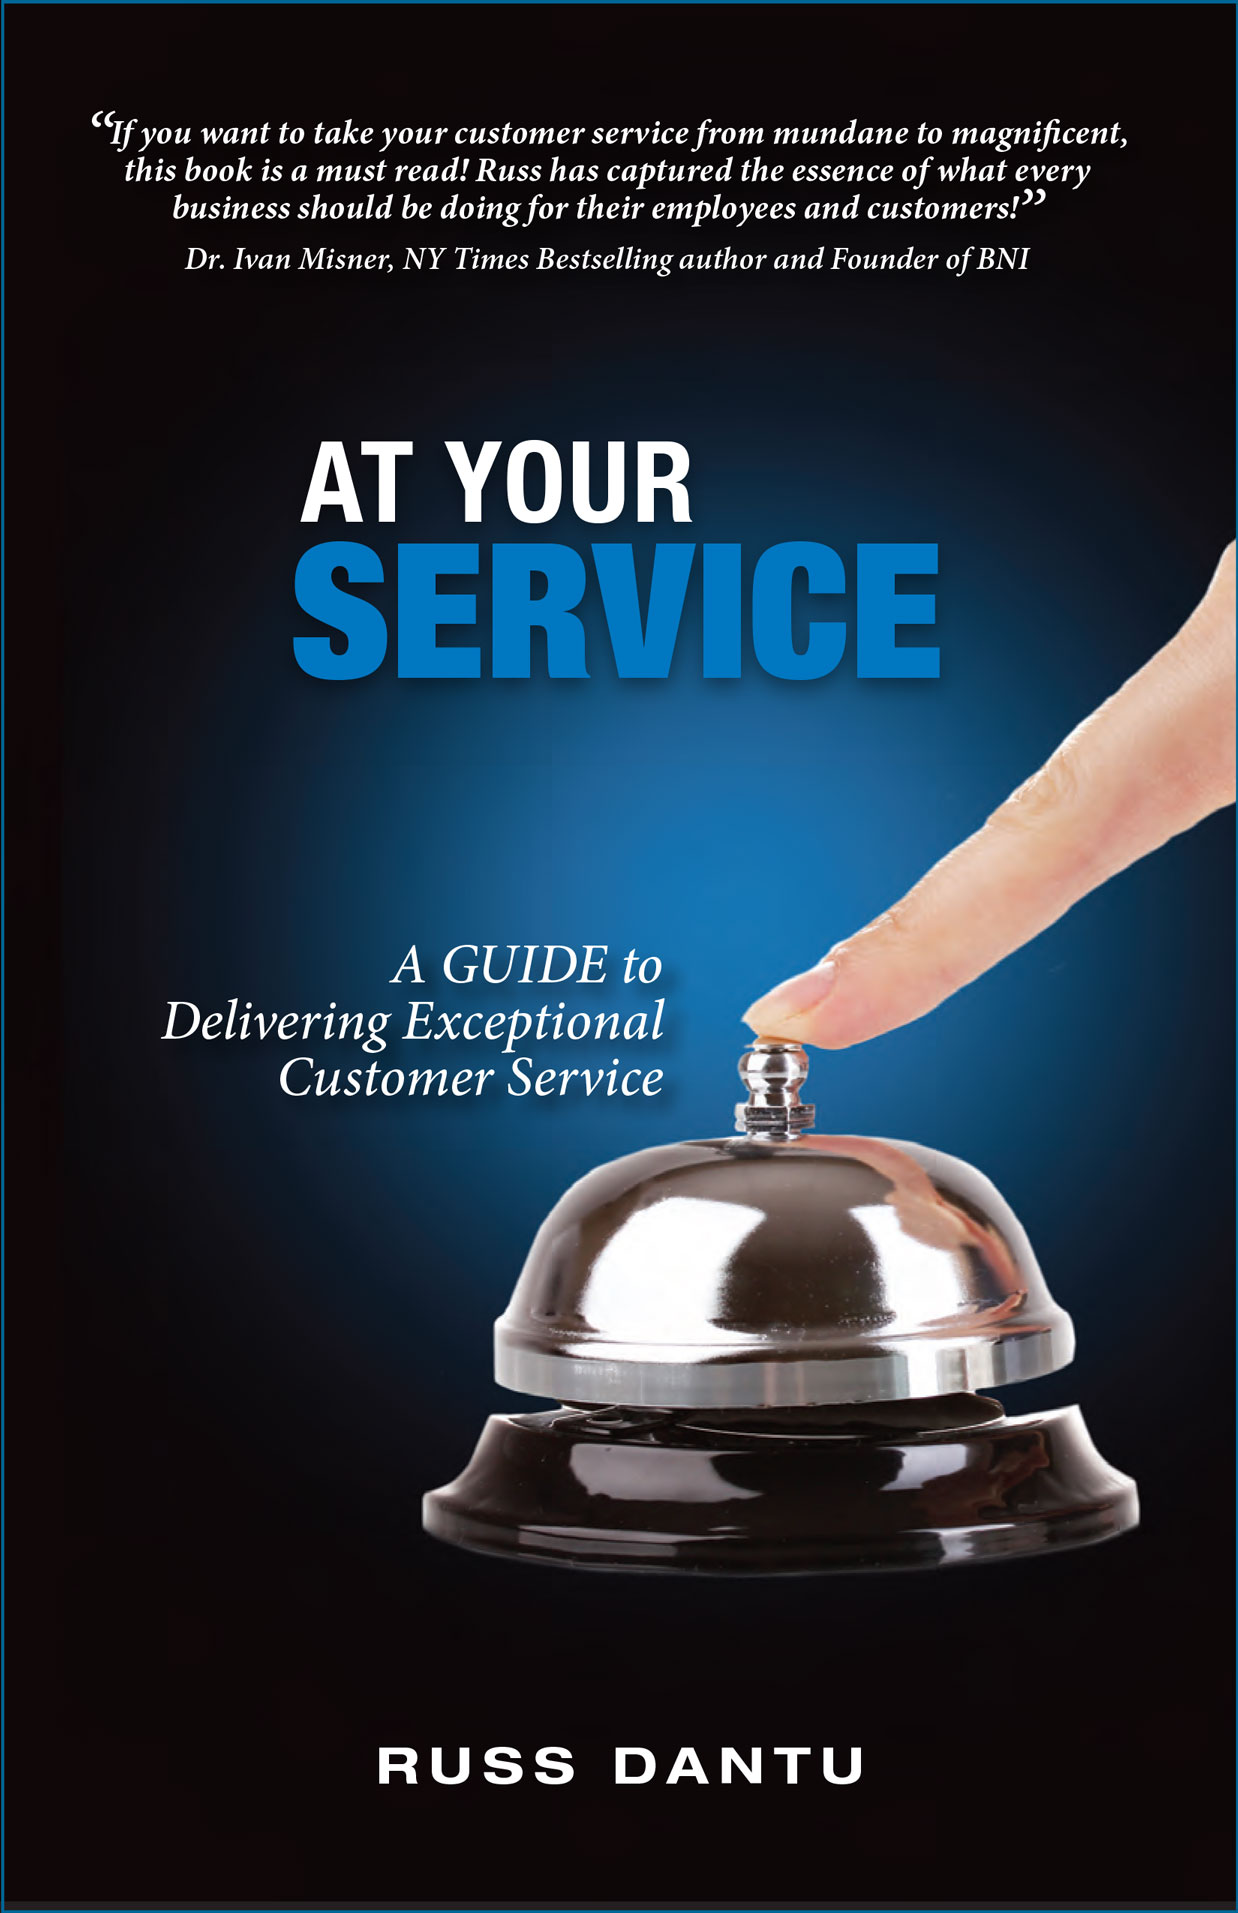  At Your Service; A Guide to Delivering Exceptional Customer Service.